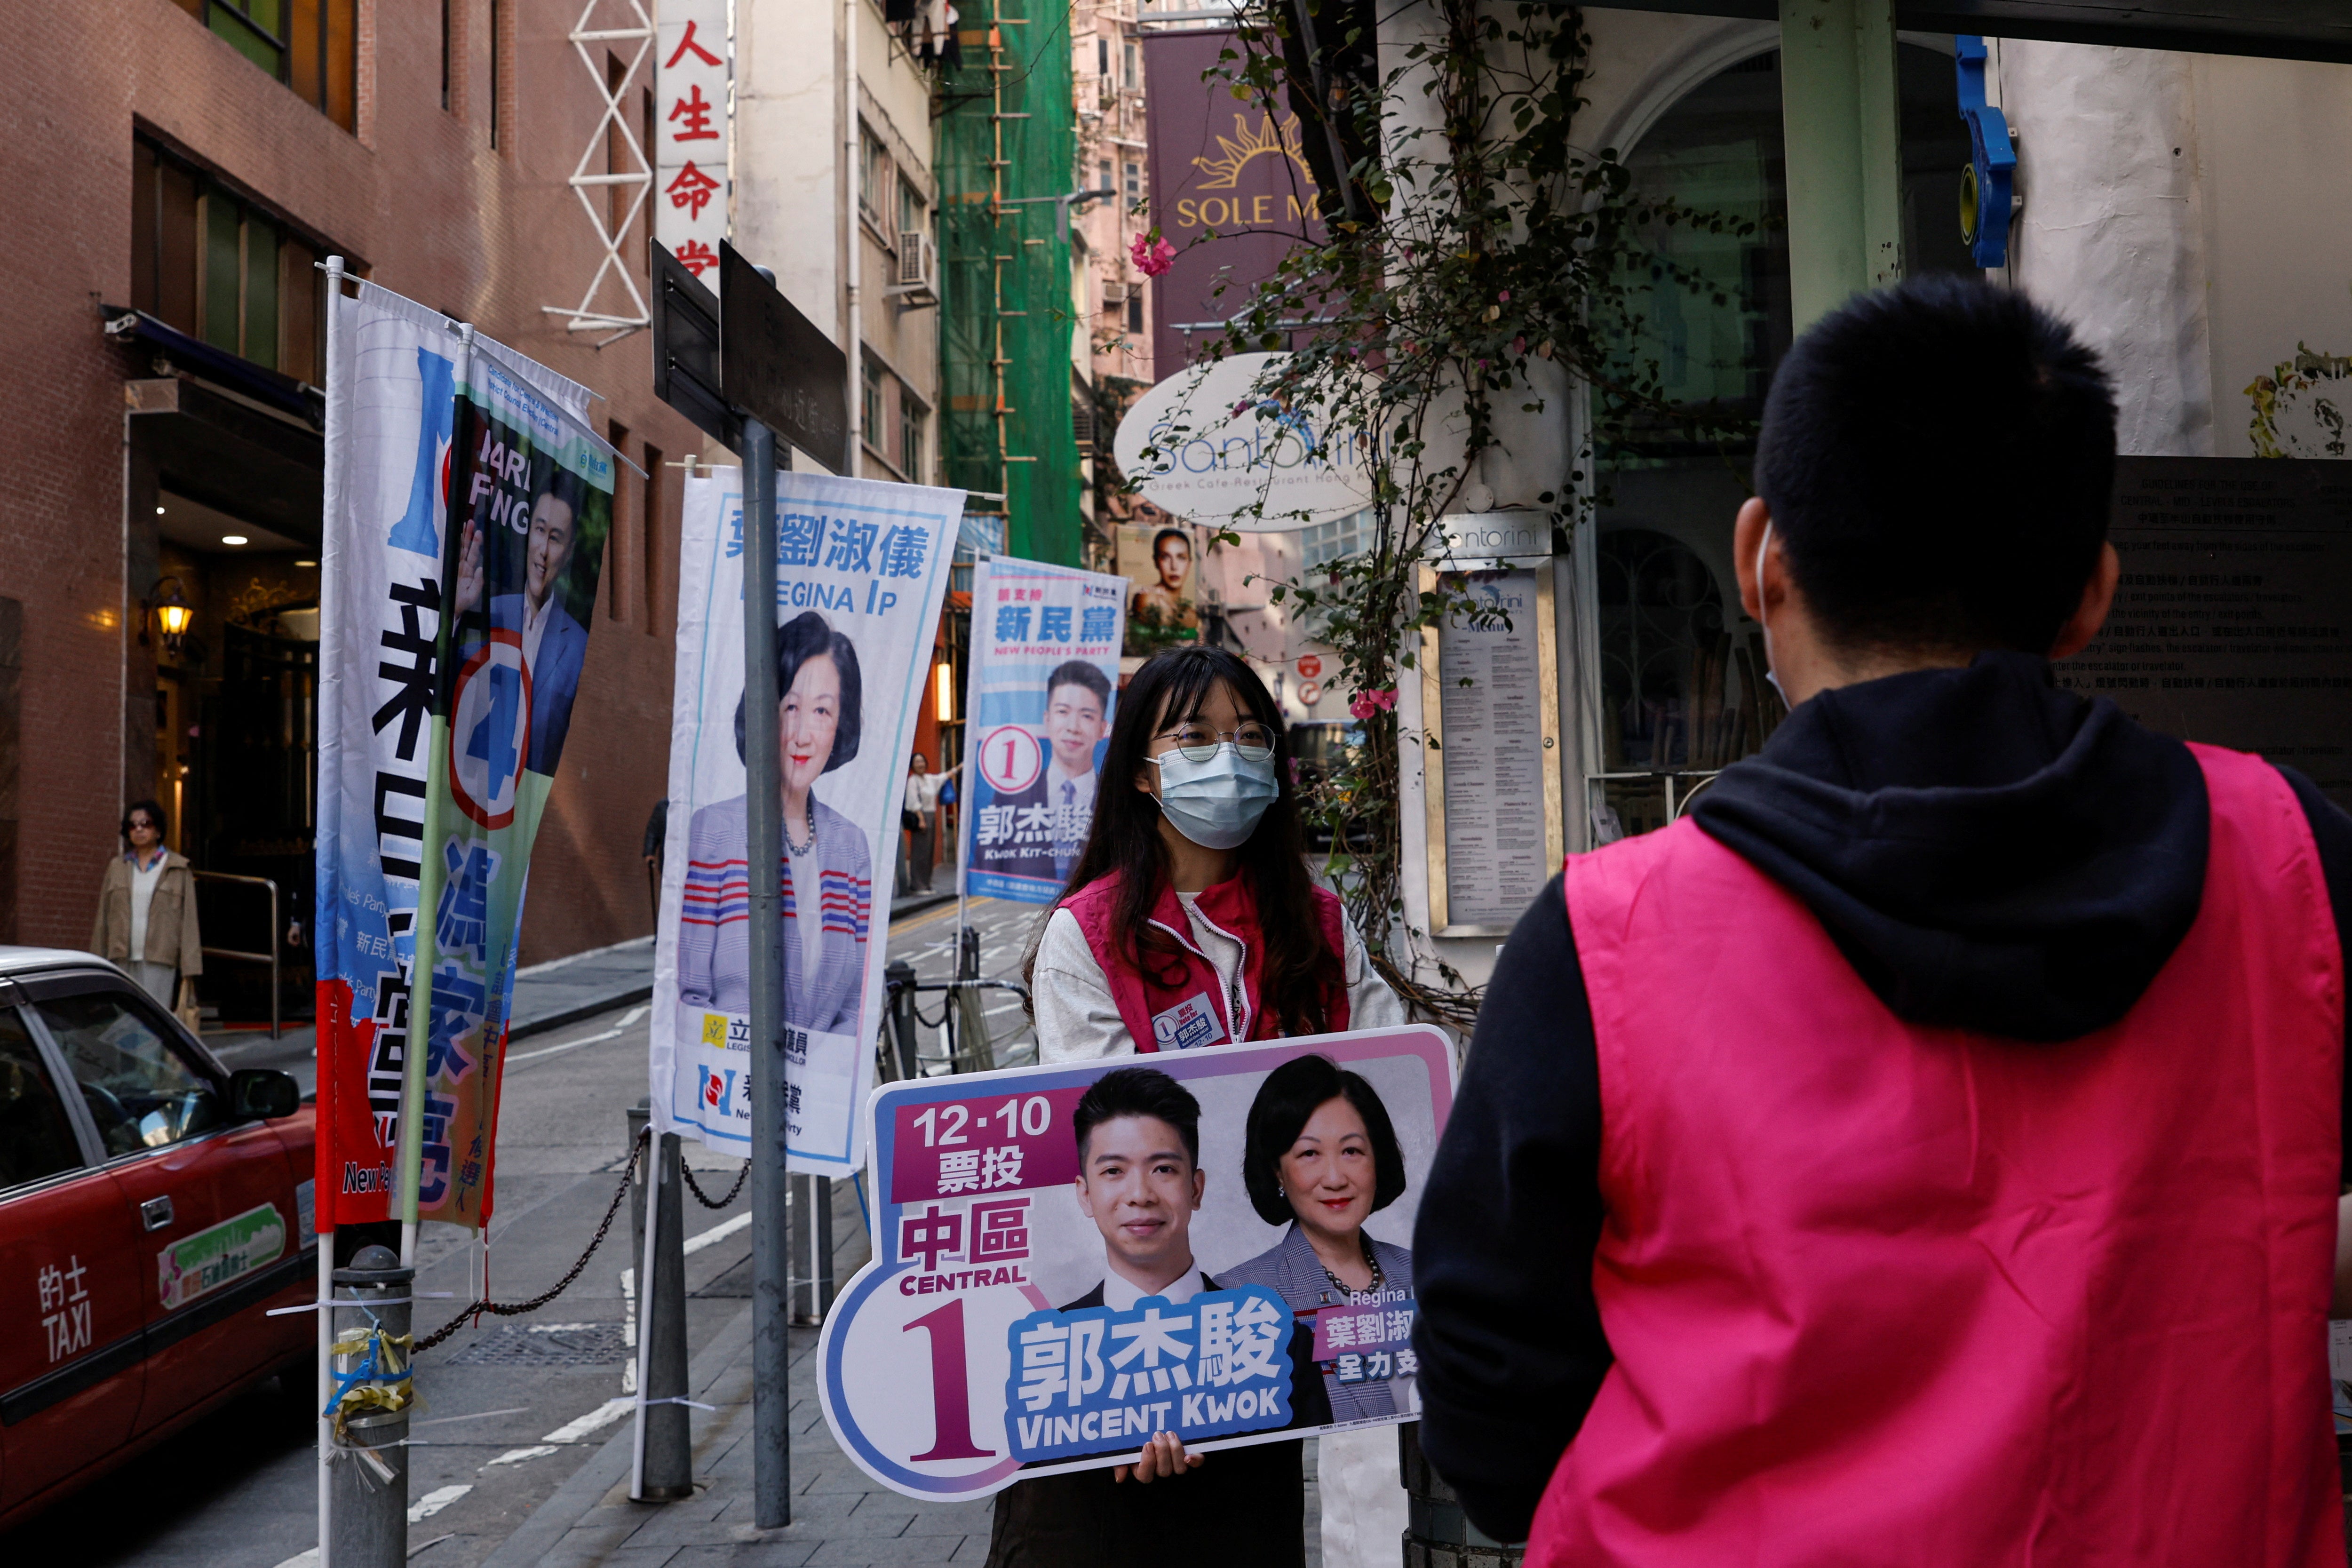 A volunteer campaigns for the New People’s Party during the District Council election in Hong Kong